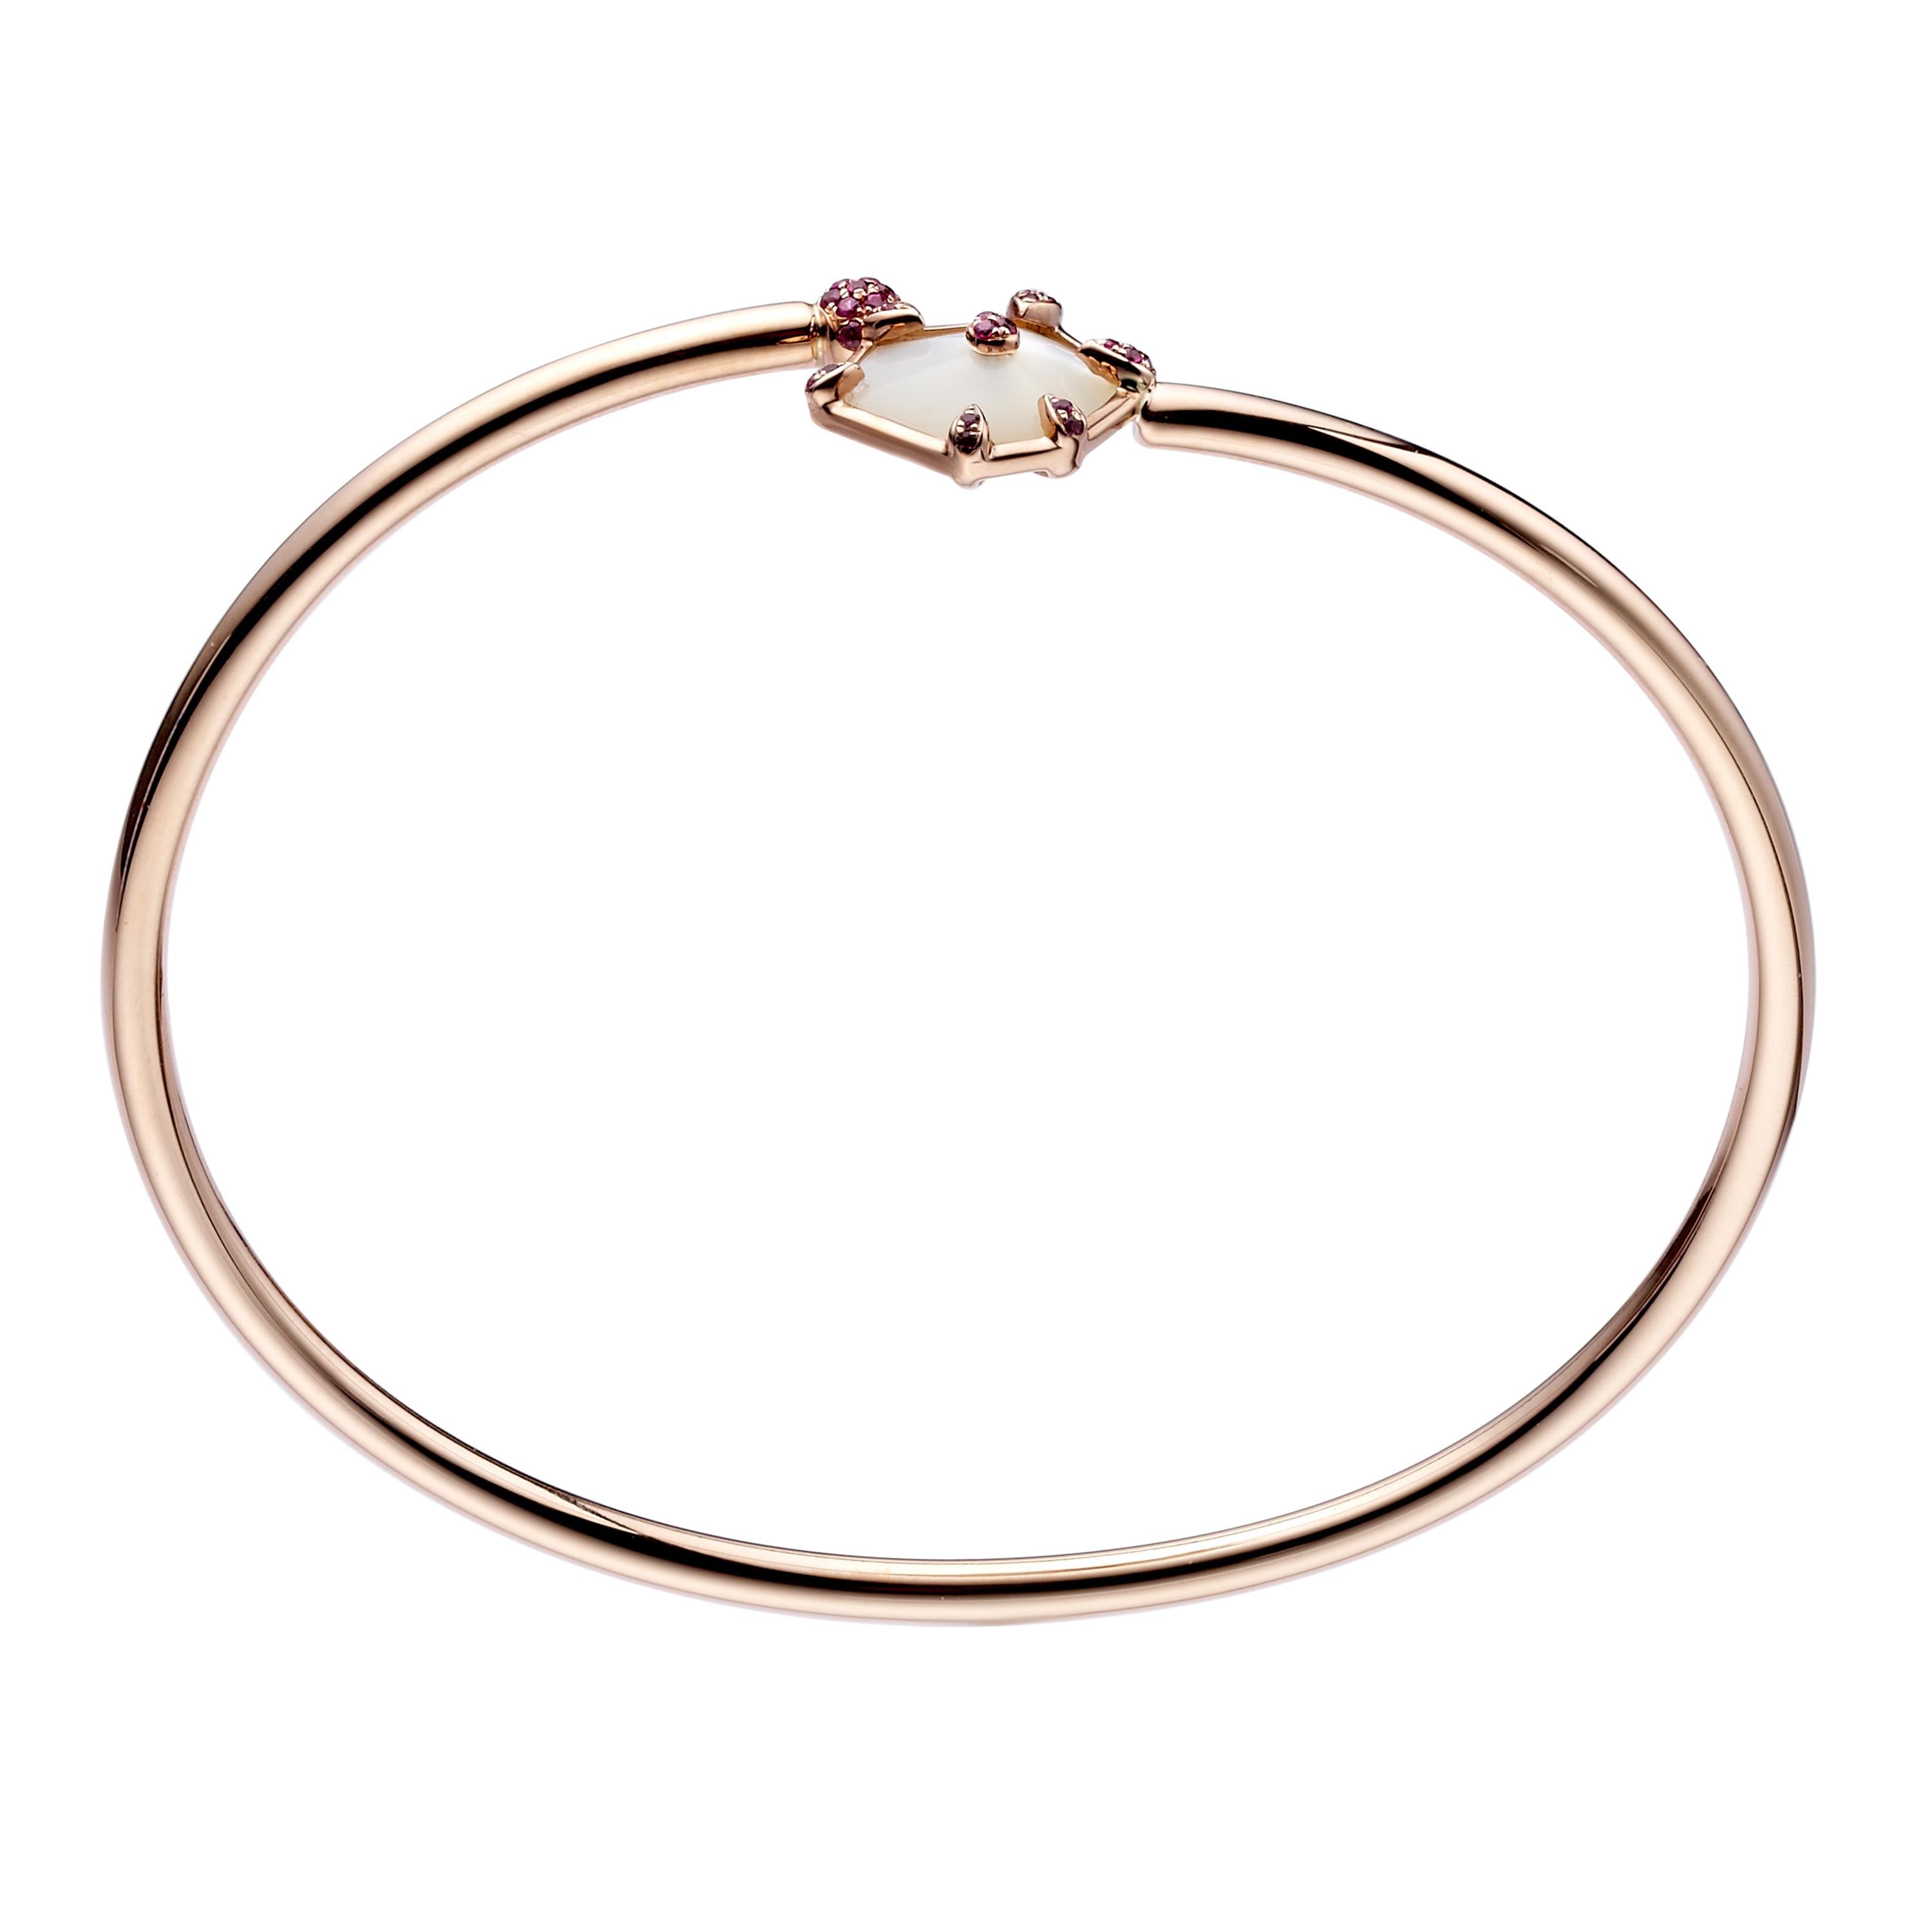 Contemporary Fei Liu Mother of Pearl Pink Sapphire Bangle Bracelet